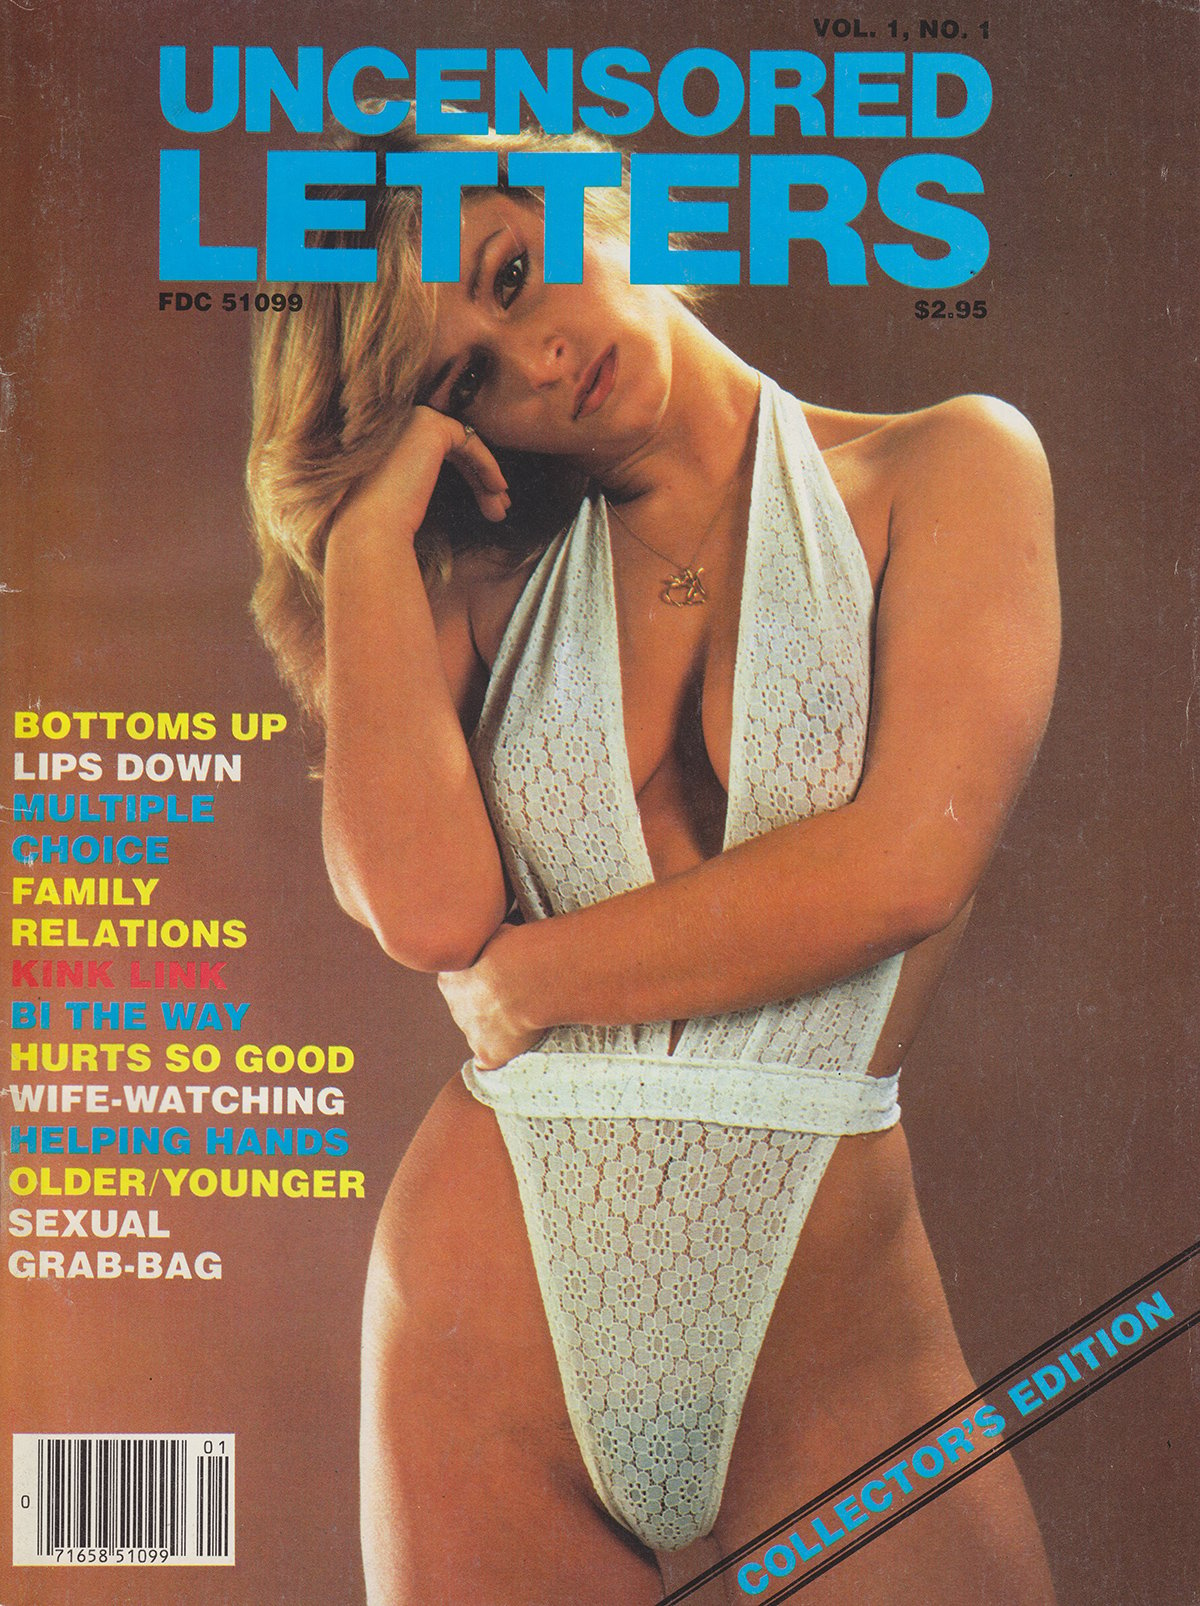 Uncensored Letters Vol. 1 # 1, 1983